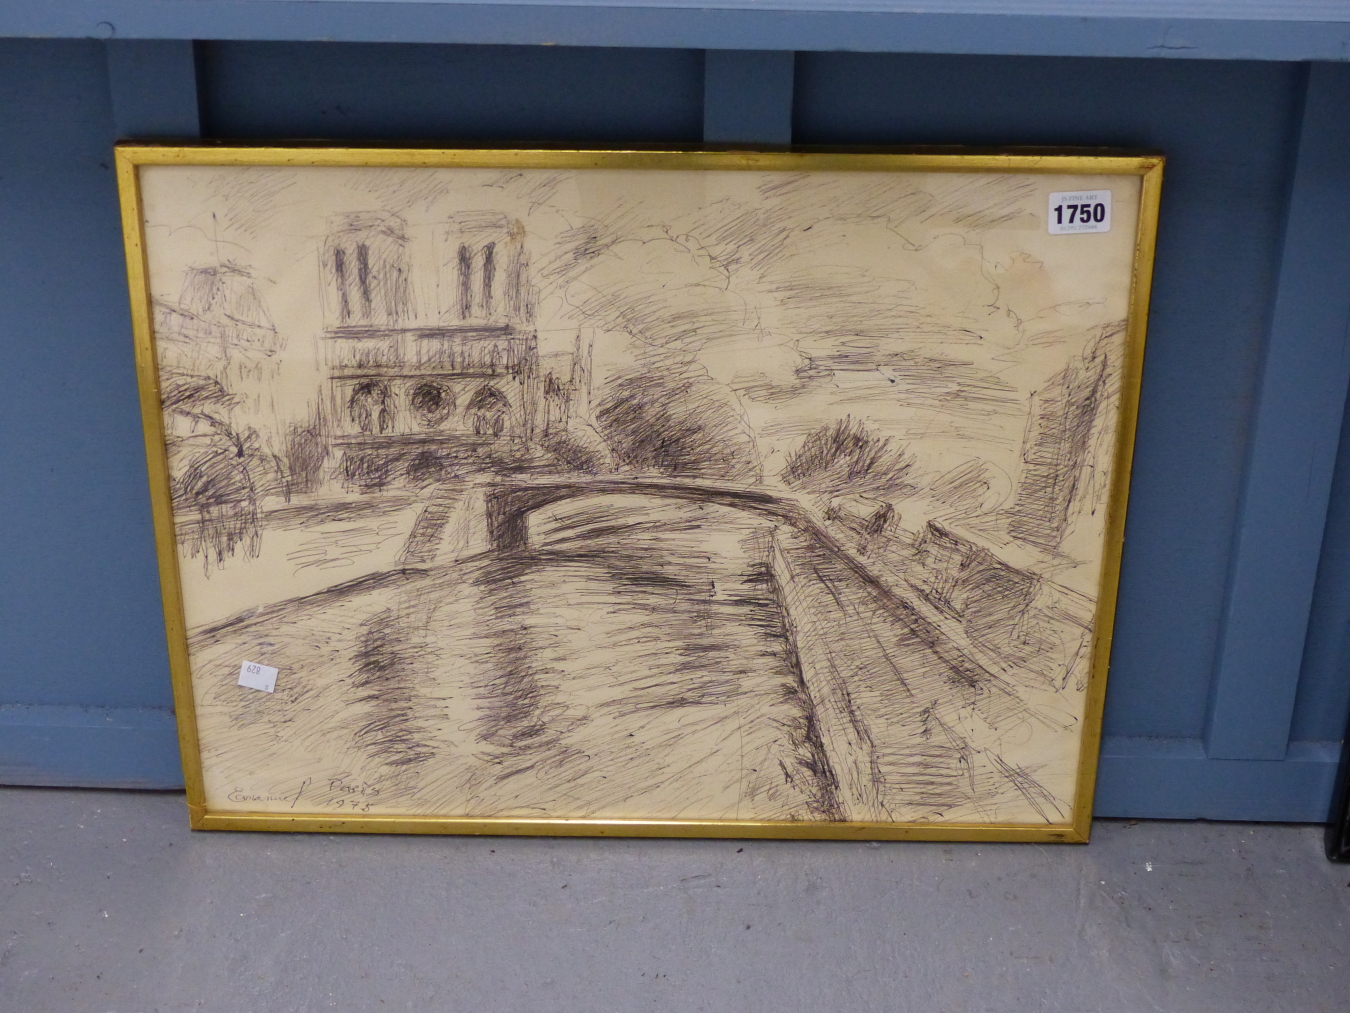 CONTEMPORARY CONTINENTAL, MODERNIST ABSTRACT PARISIAN SCENE SIGNED "EMANUEL" AND DATED 1975. INK - Image 2 of 4